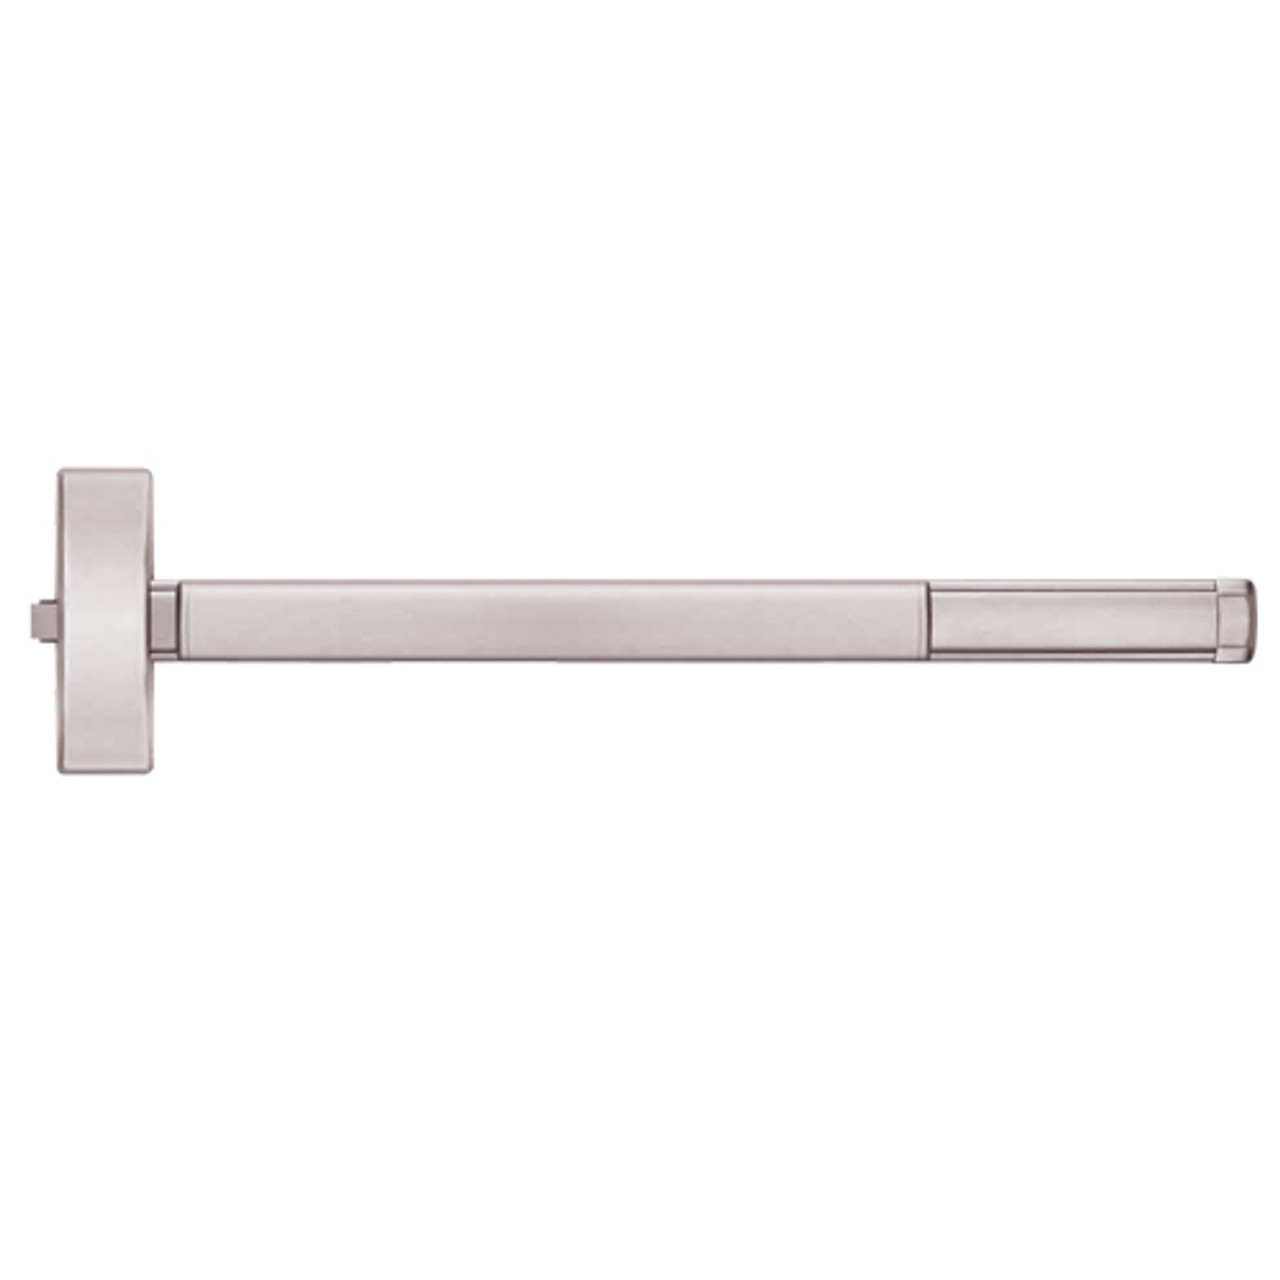 ELR2115-628-36 PHI 2100 Series Non Fire Rated Apex Rim Exit Device with Electric Latch Retraction Prepped for Thumb Piece Always Active in Satin Aluminum Finish